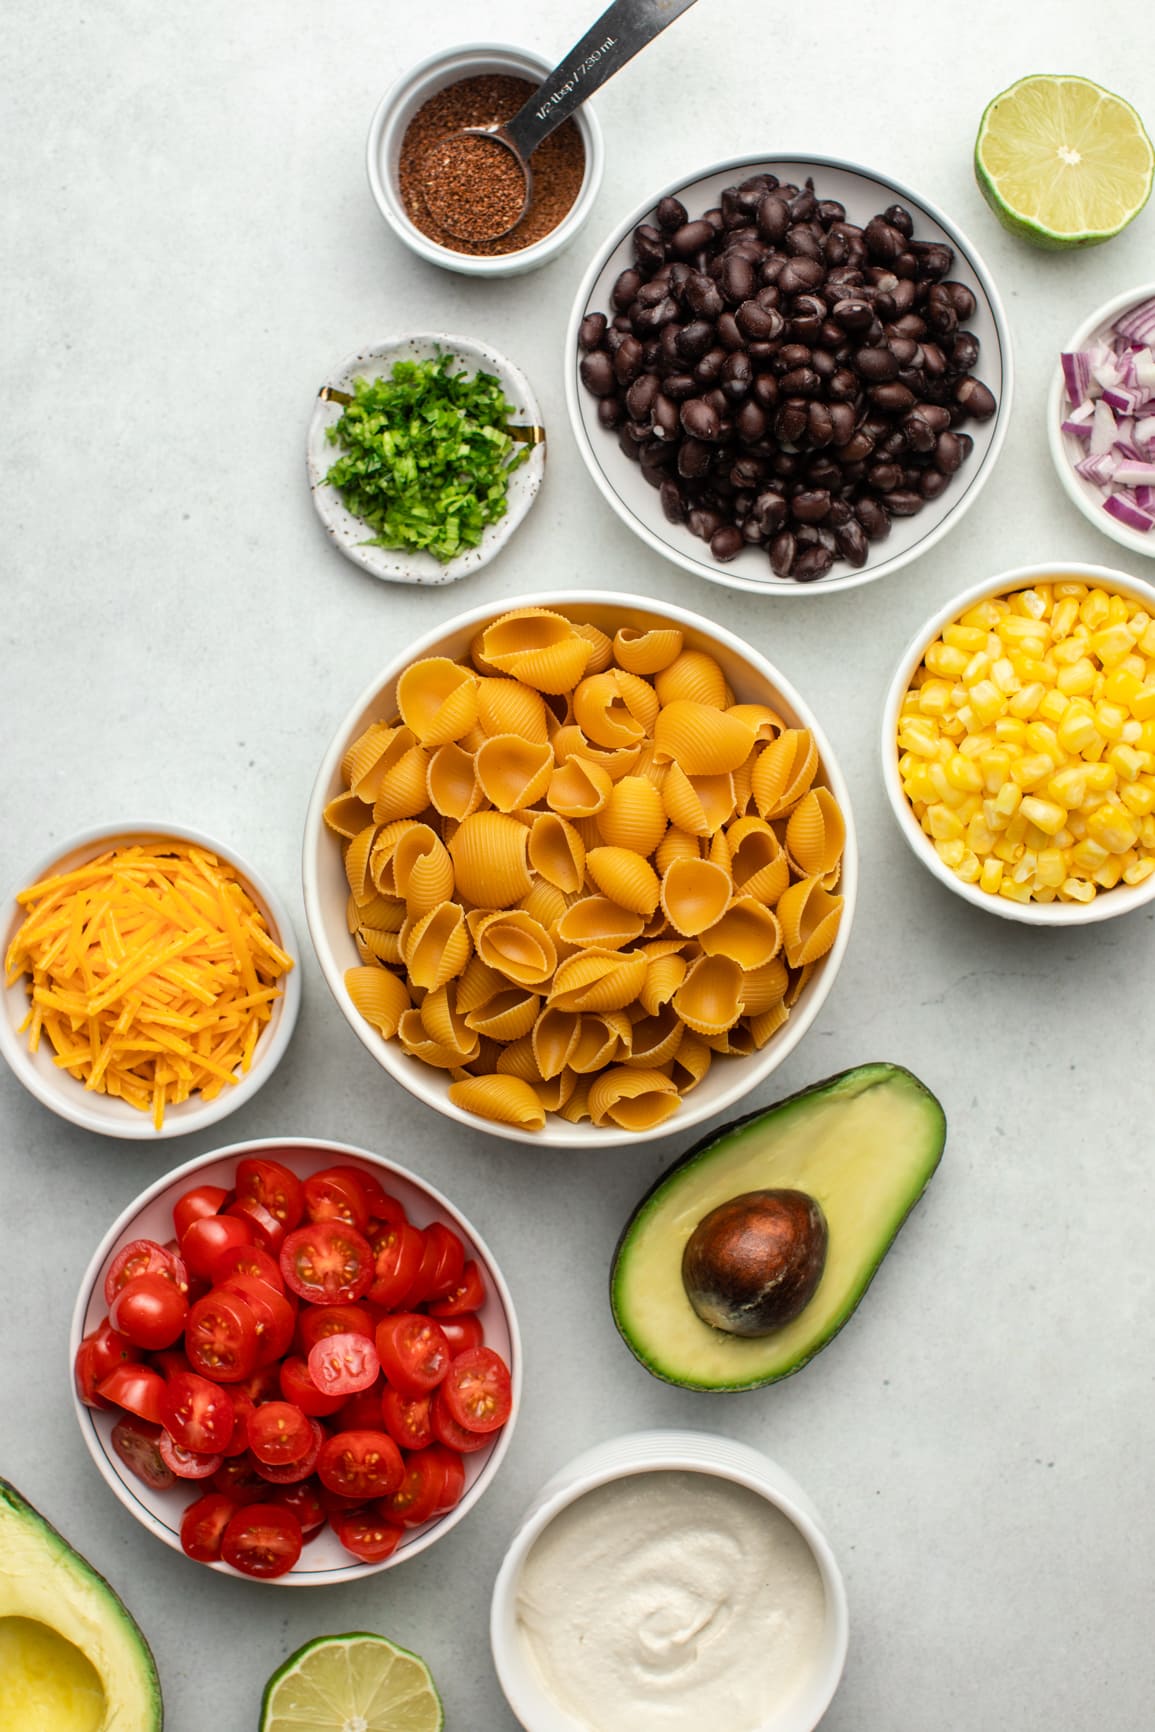 ingredients for vegan taco pasta salad in small white bowls on grey background